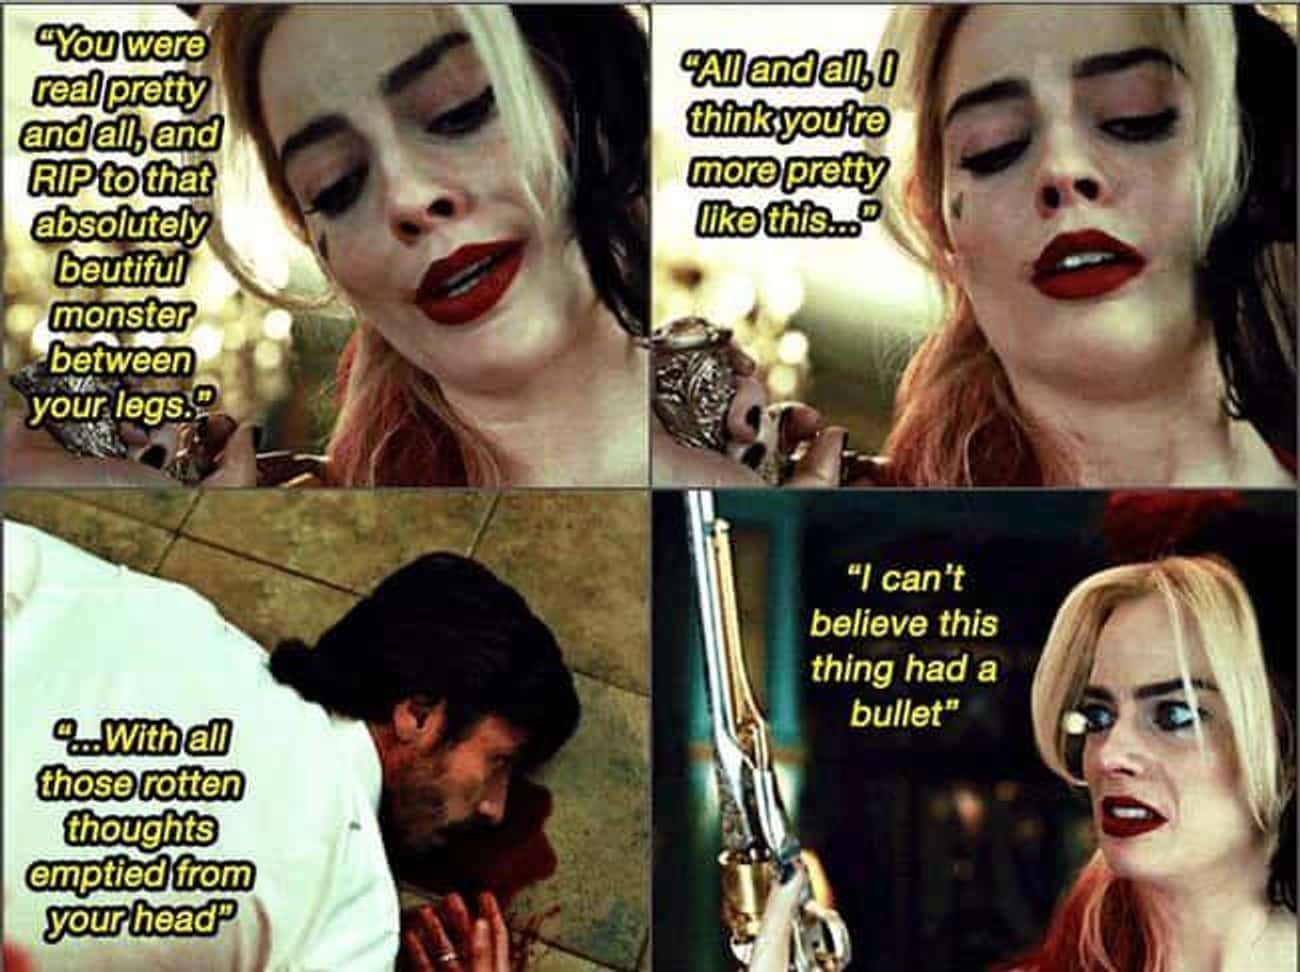 Who Gives Harley Quinn A Loaded Piece?